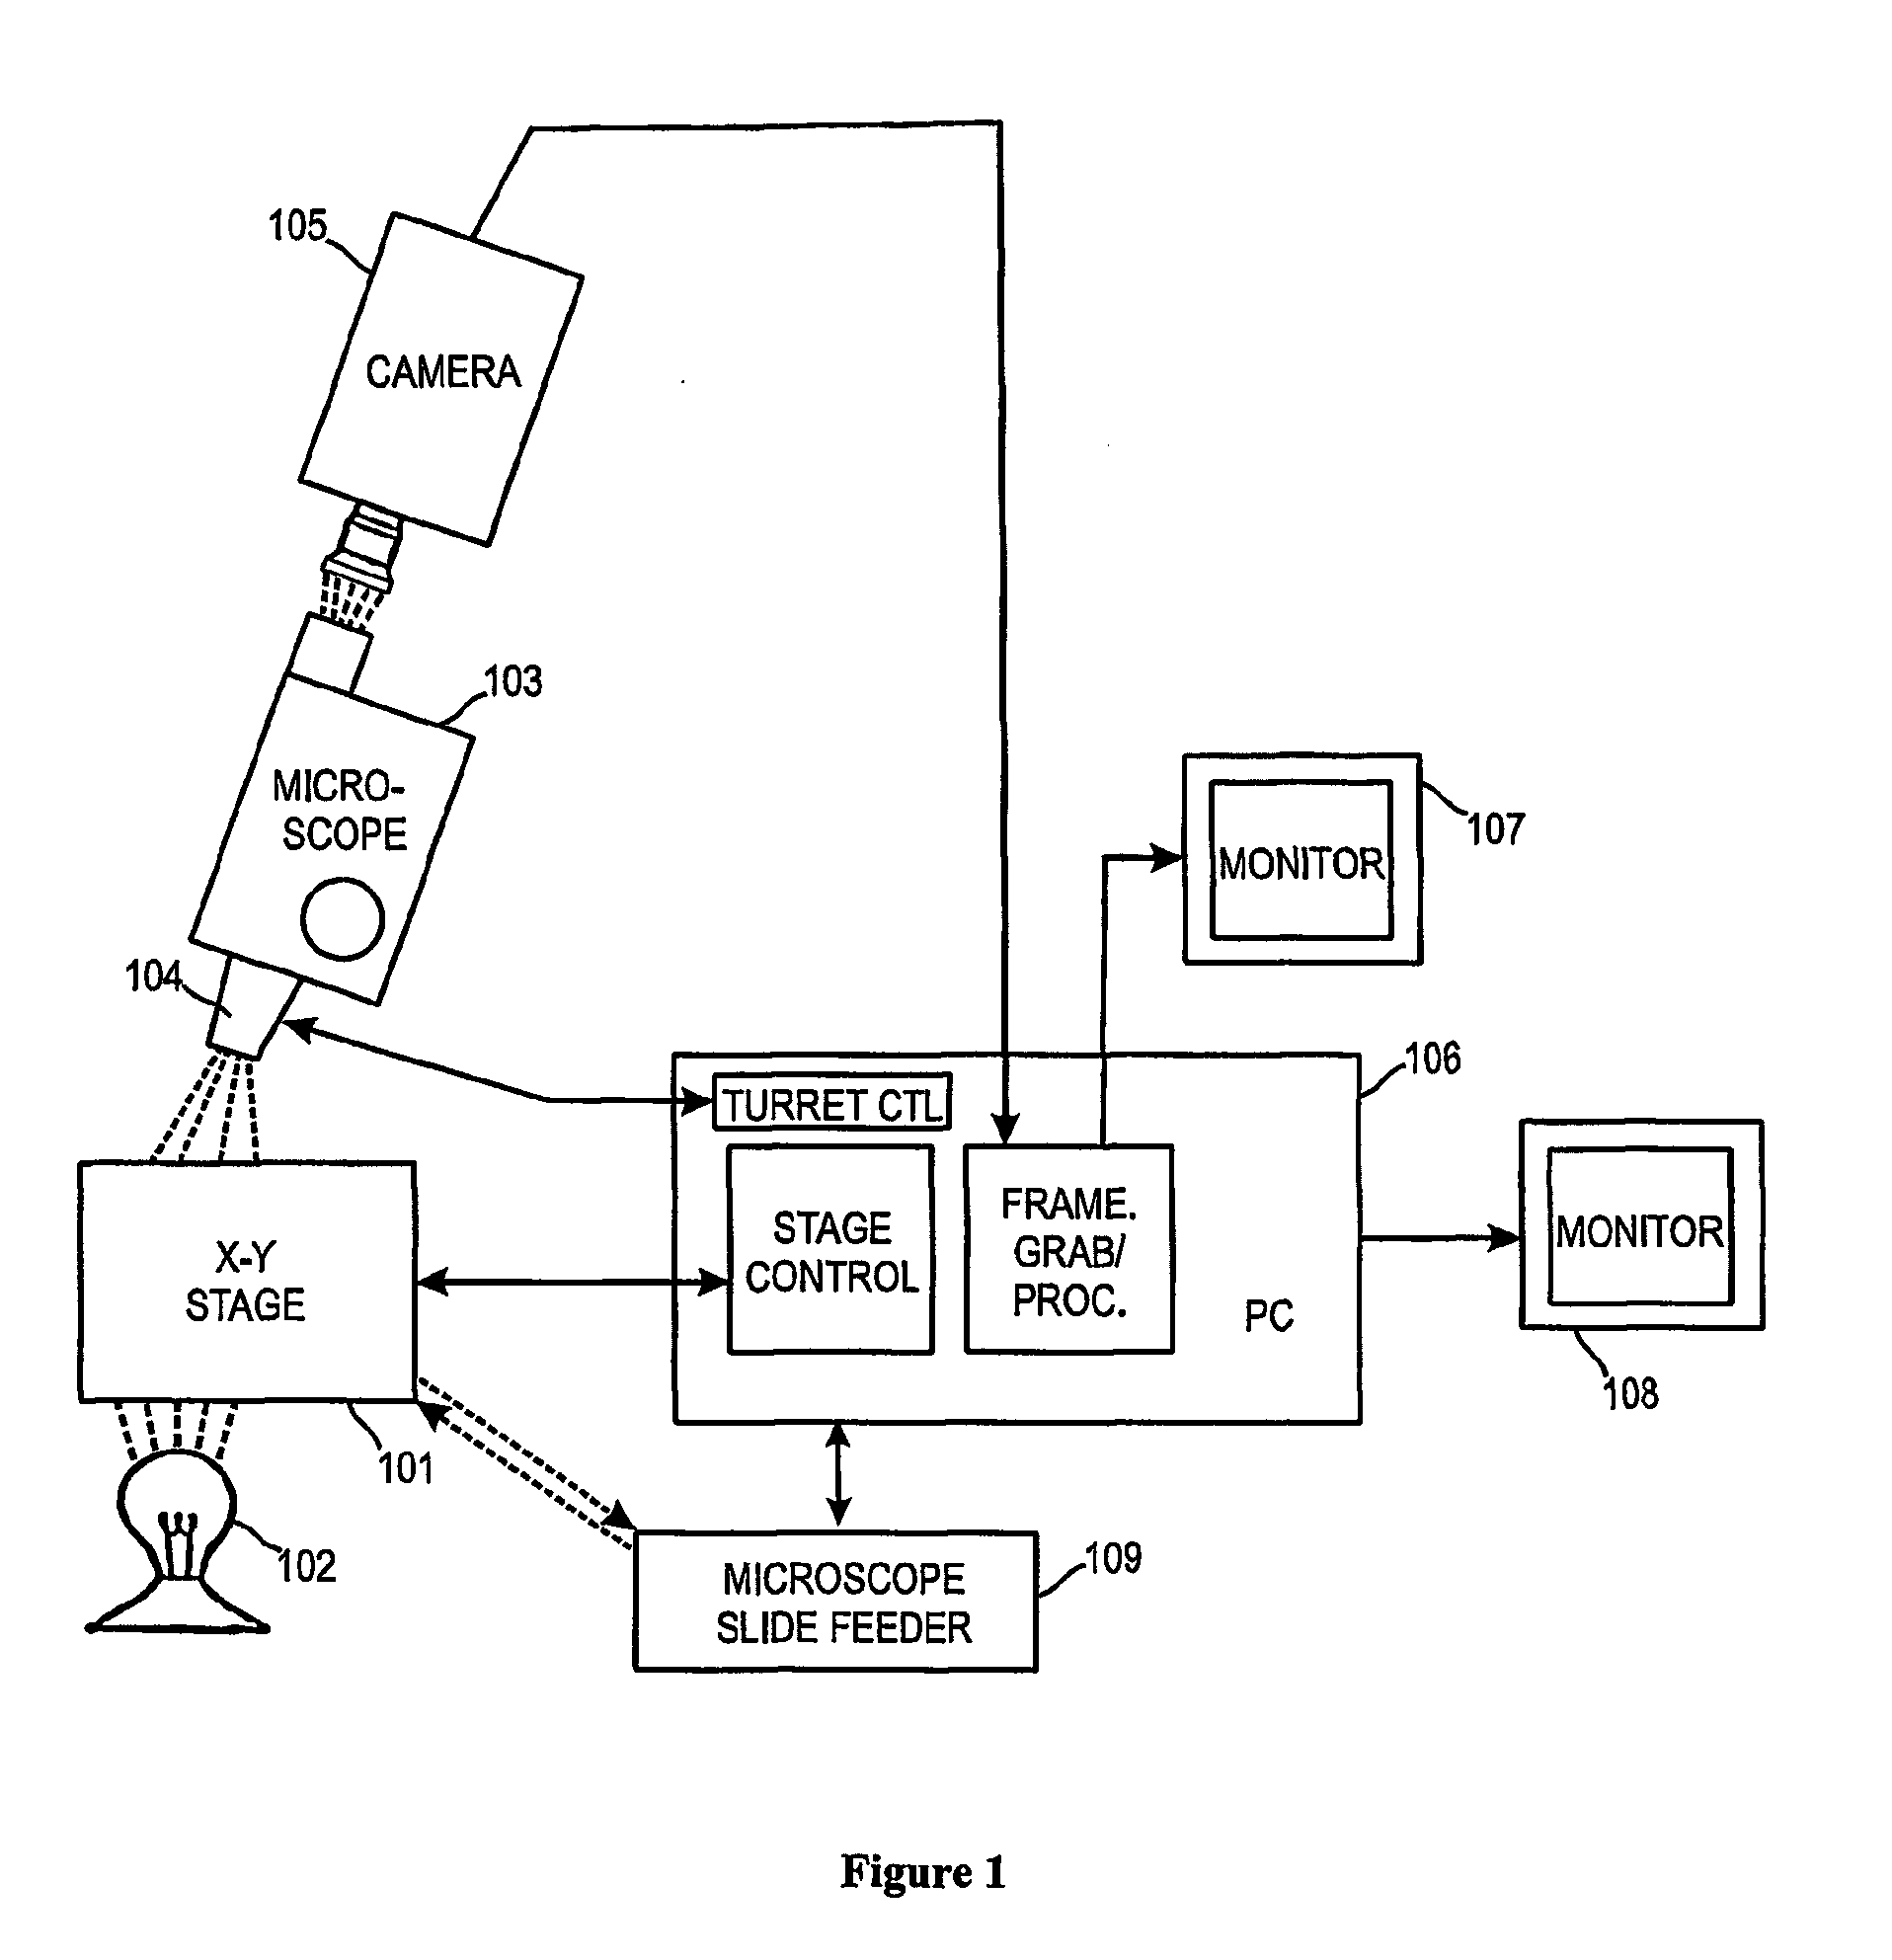 Method for detecting infectious agents using computer controlled automated image analysis